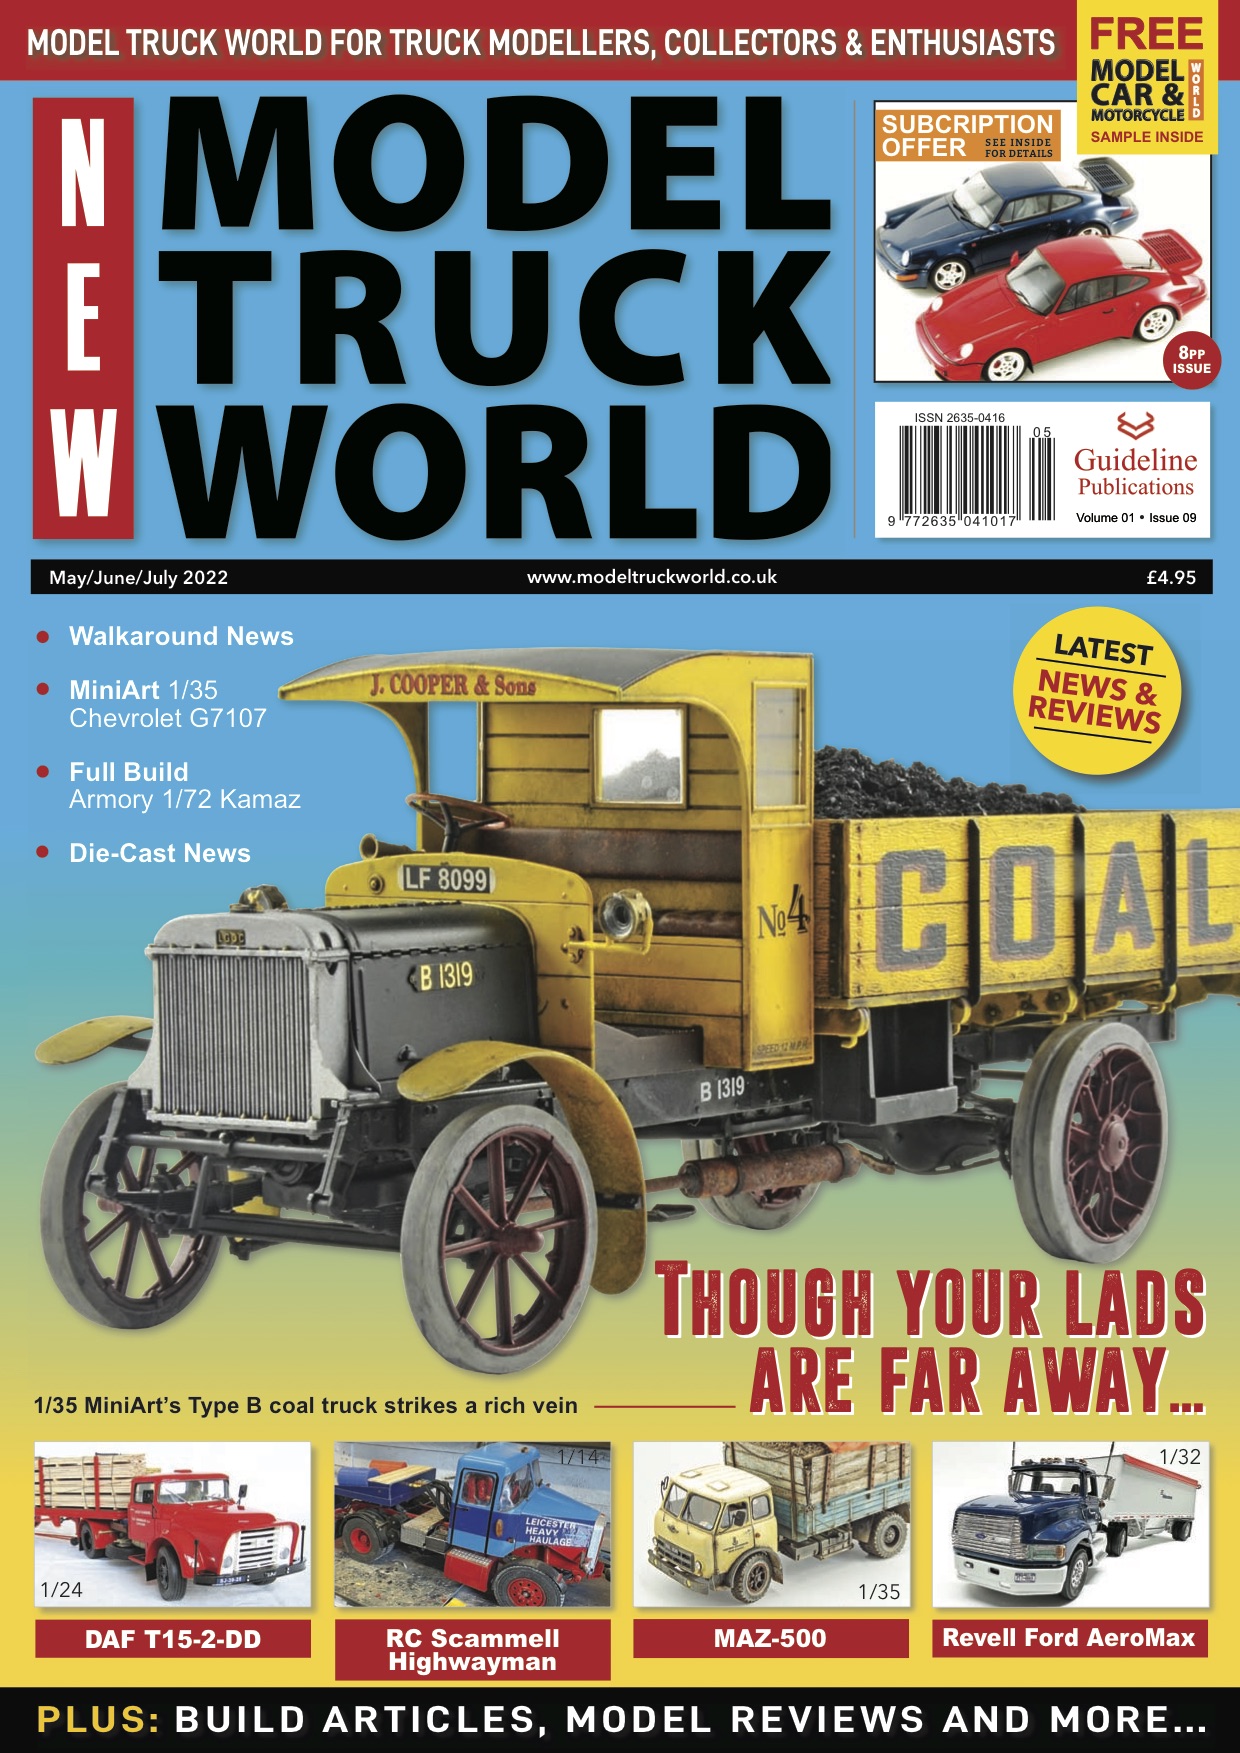 Guideline Publications New Model Truck World  Issue 09 Issue 9 